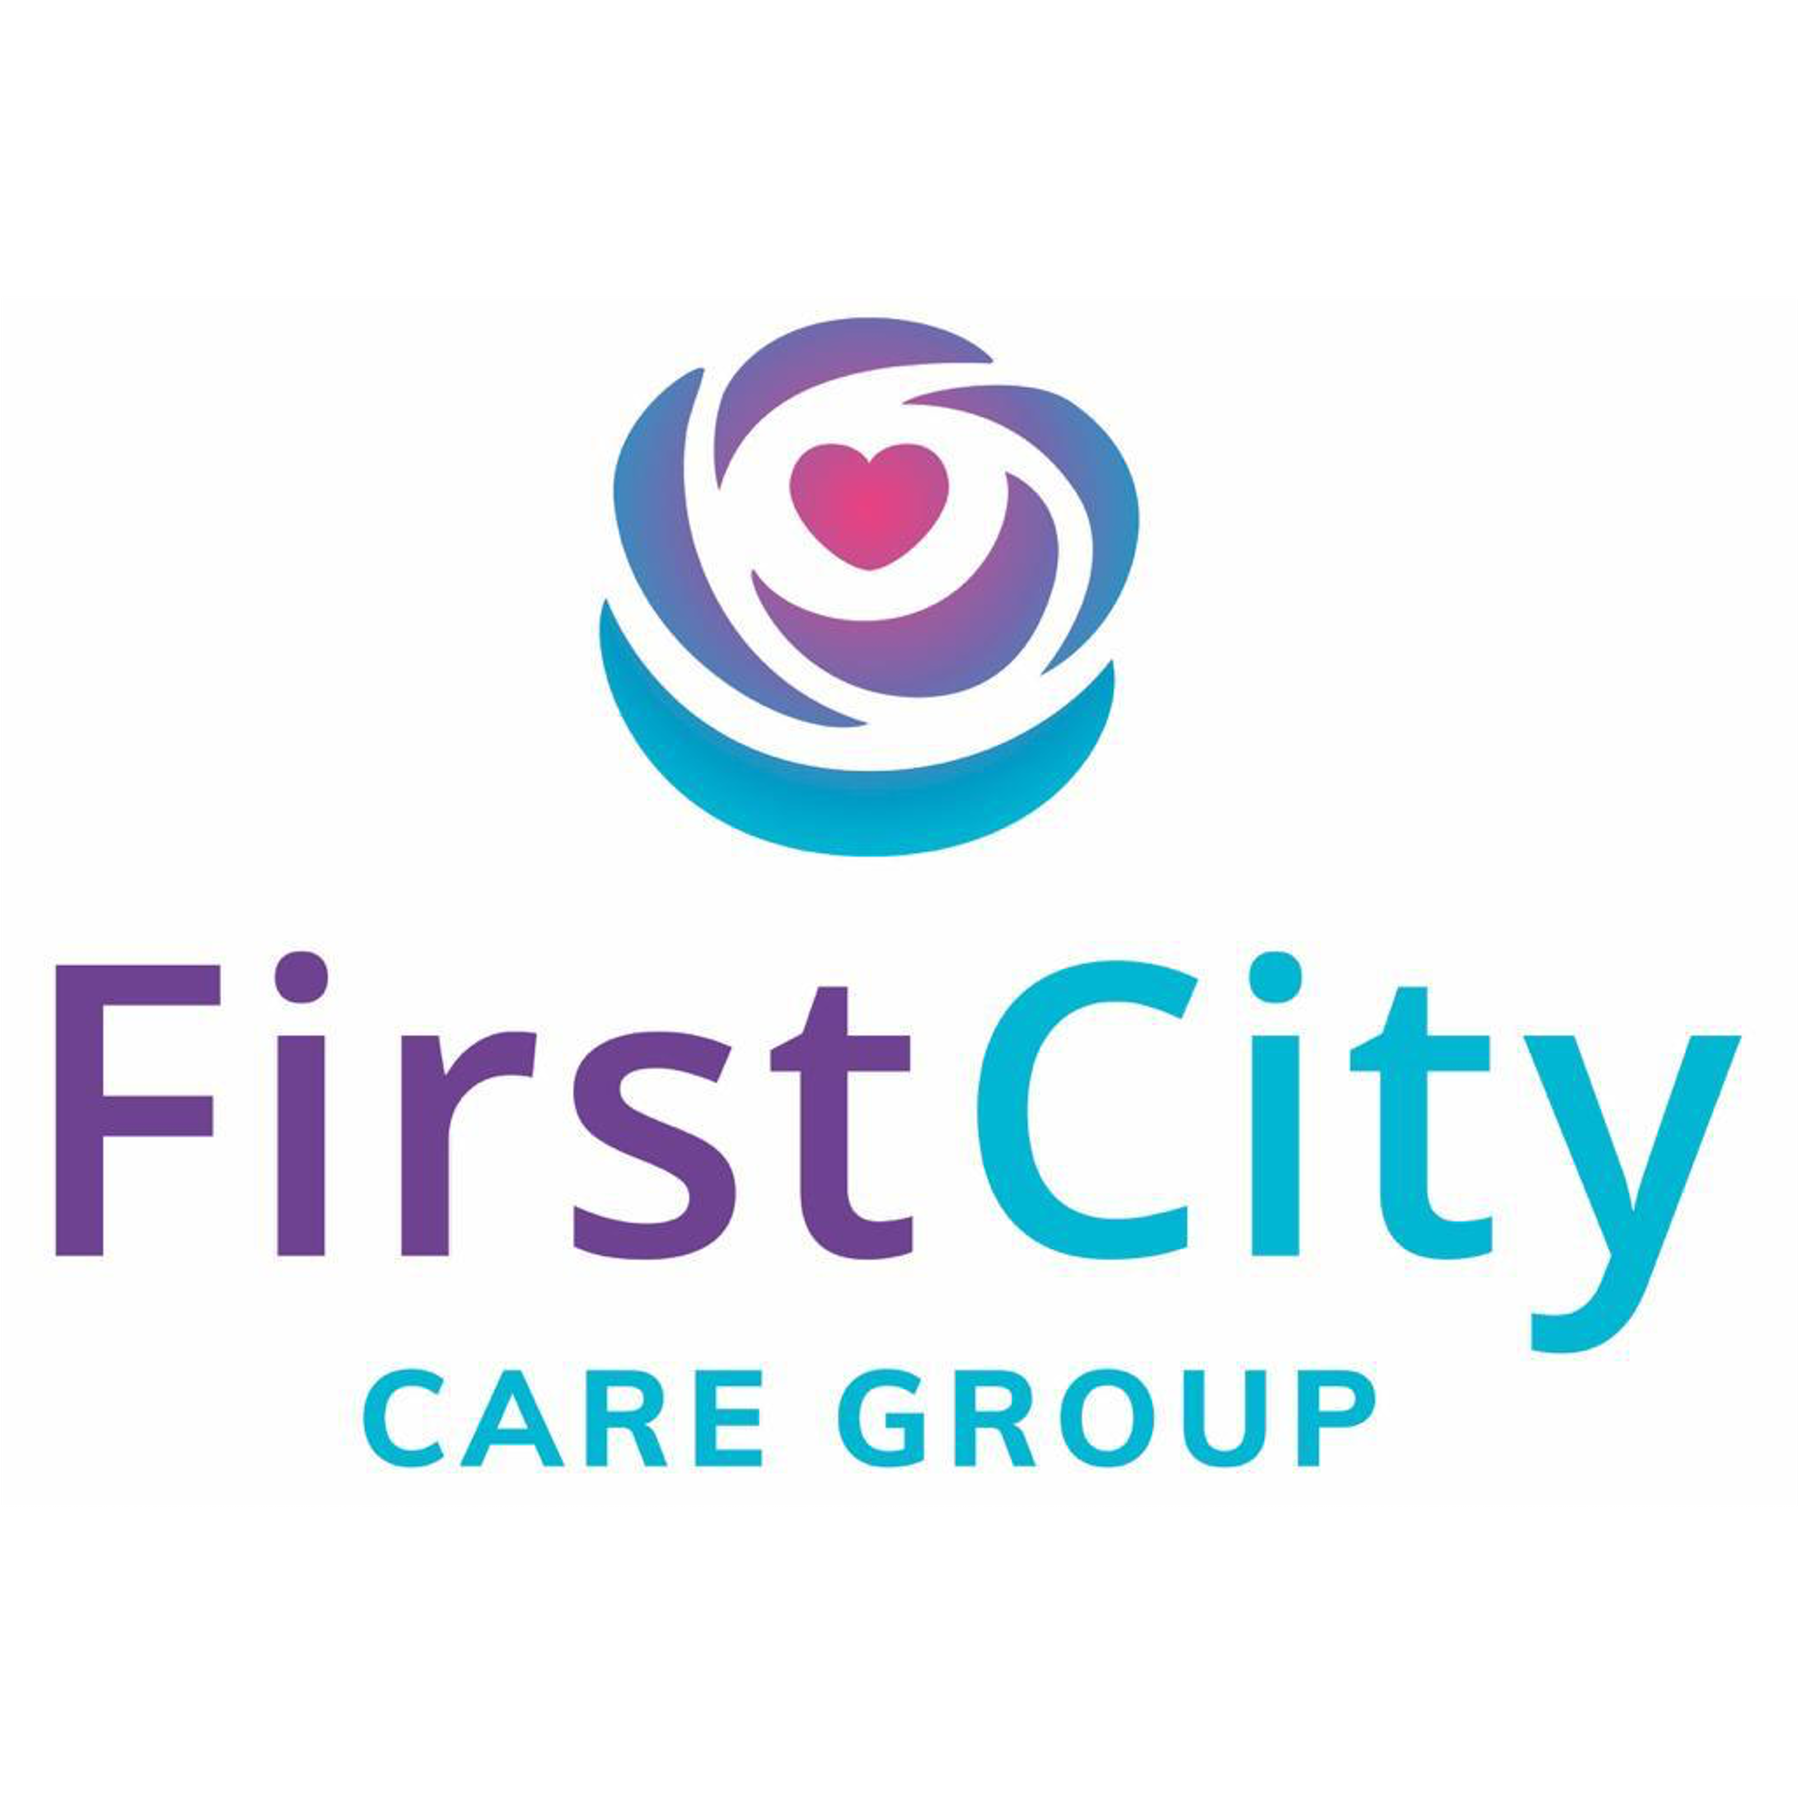 First City Care Group